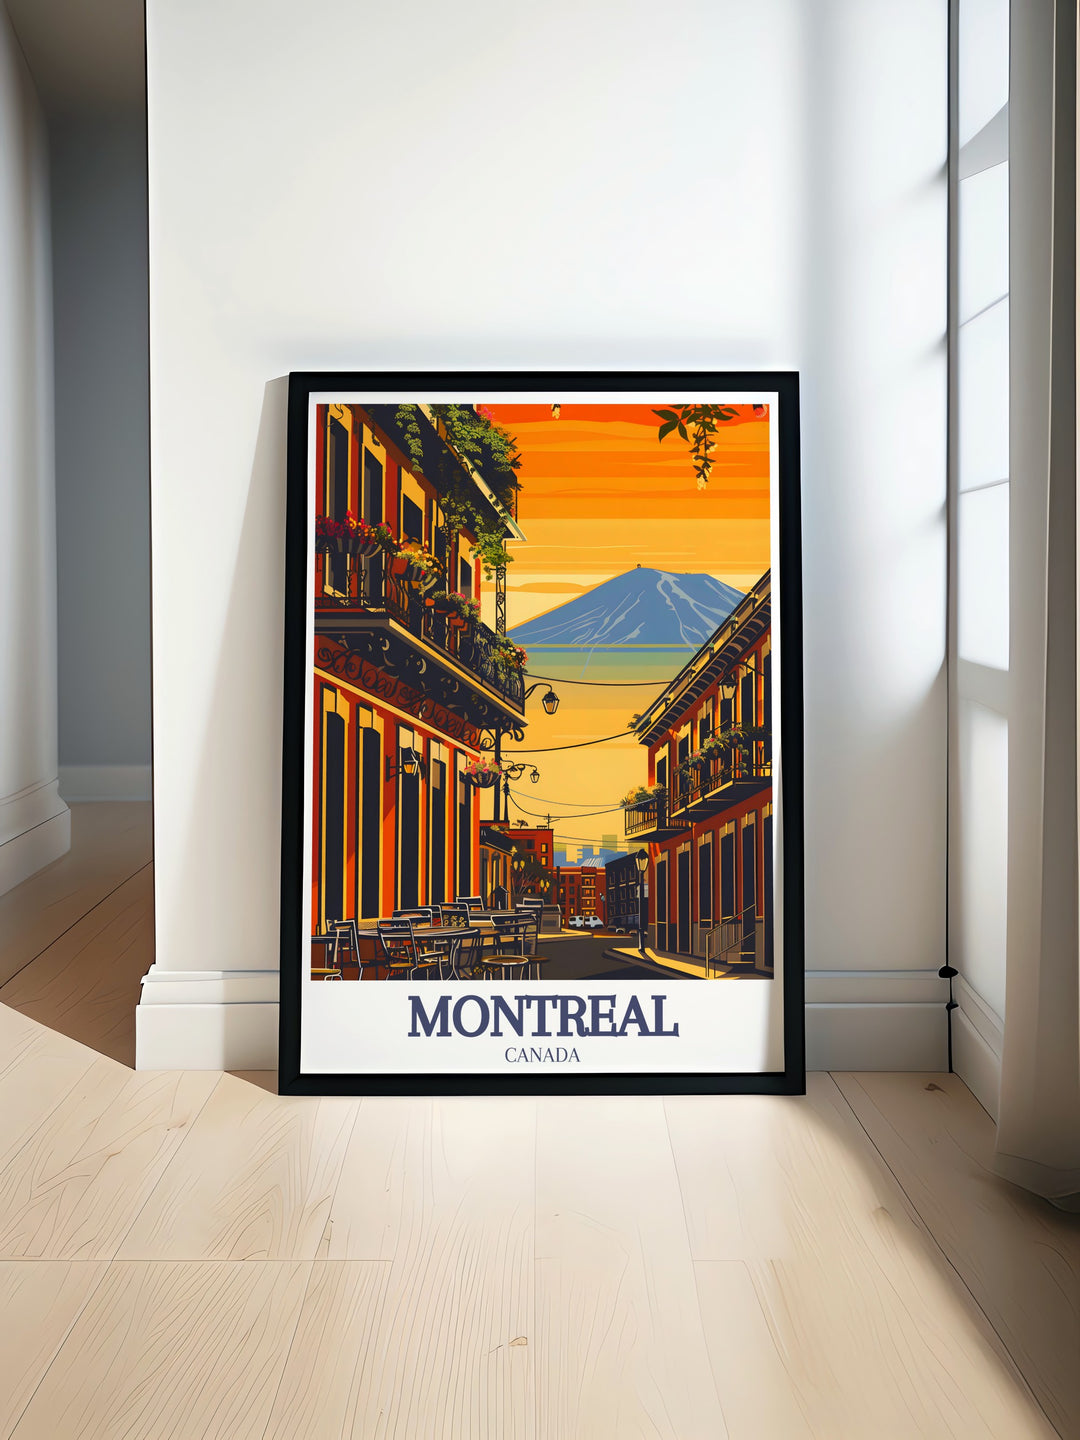 Rue Crescent Mount Royal wall art showcasing the vibrant energy of Montreals bustling street and the serene beauty of the park perfect for home decor or as a Canada gift detailed illustration bringing Montreals charm to any room.